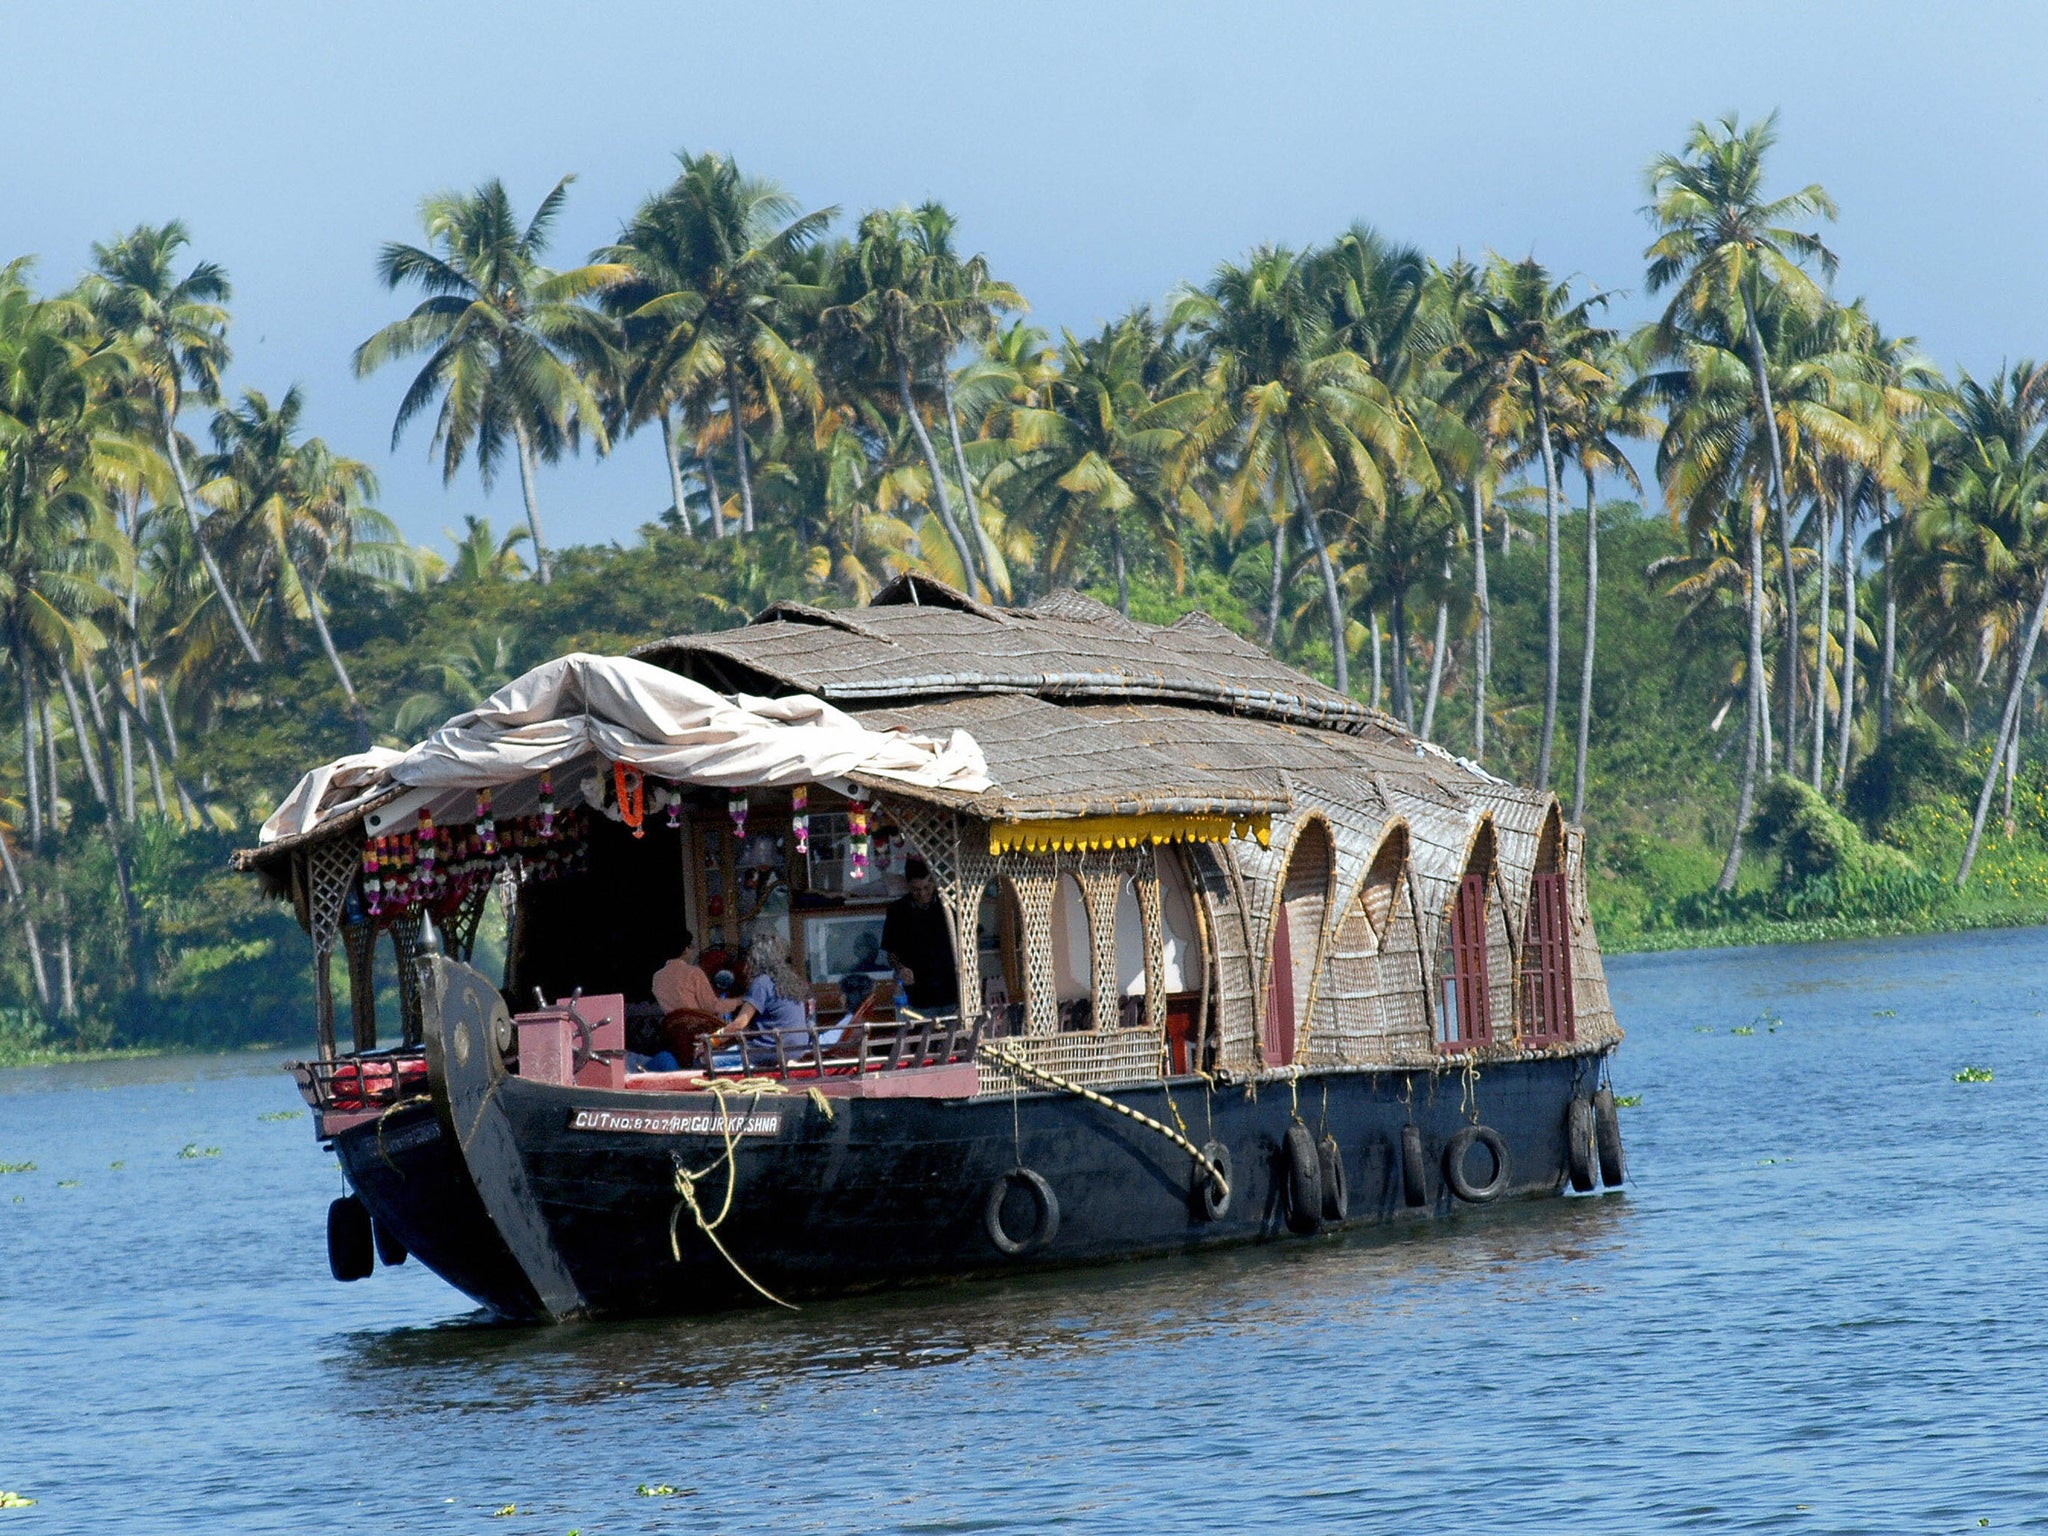 Over 1,200 barges now float on backwaters that have been essential to the local community (Getty)